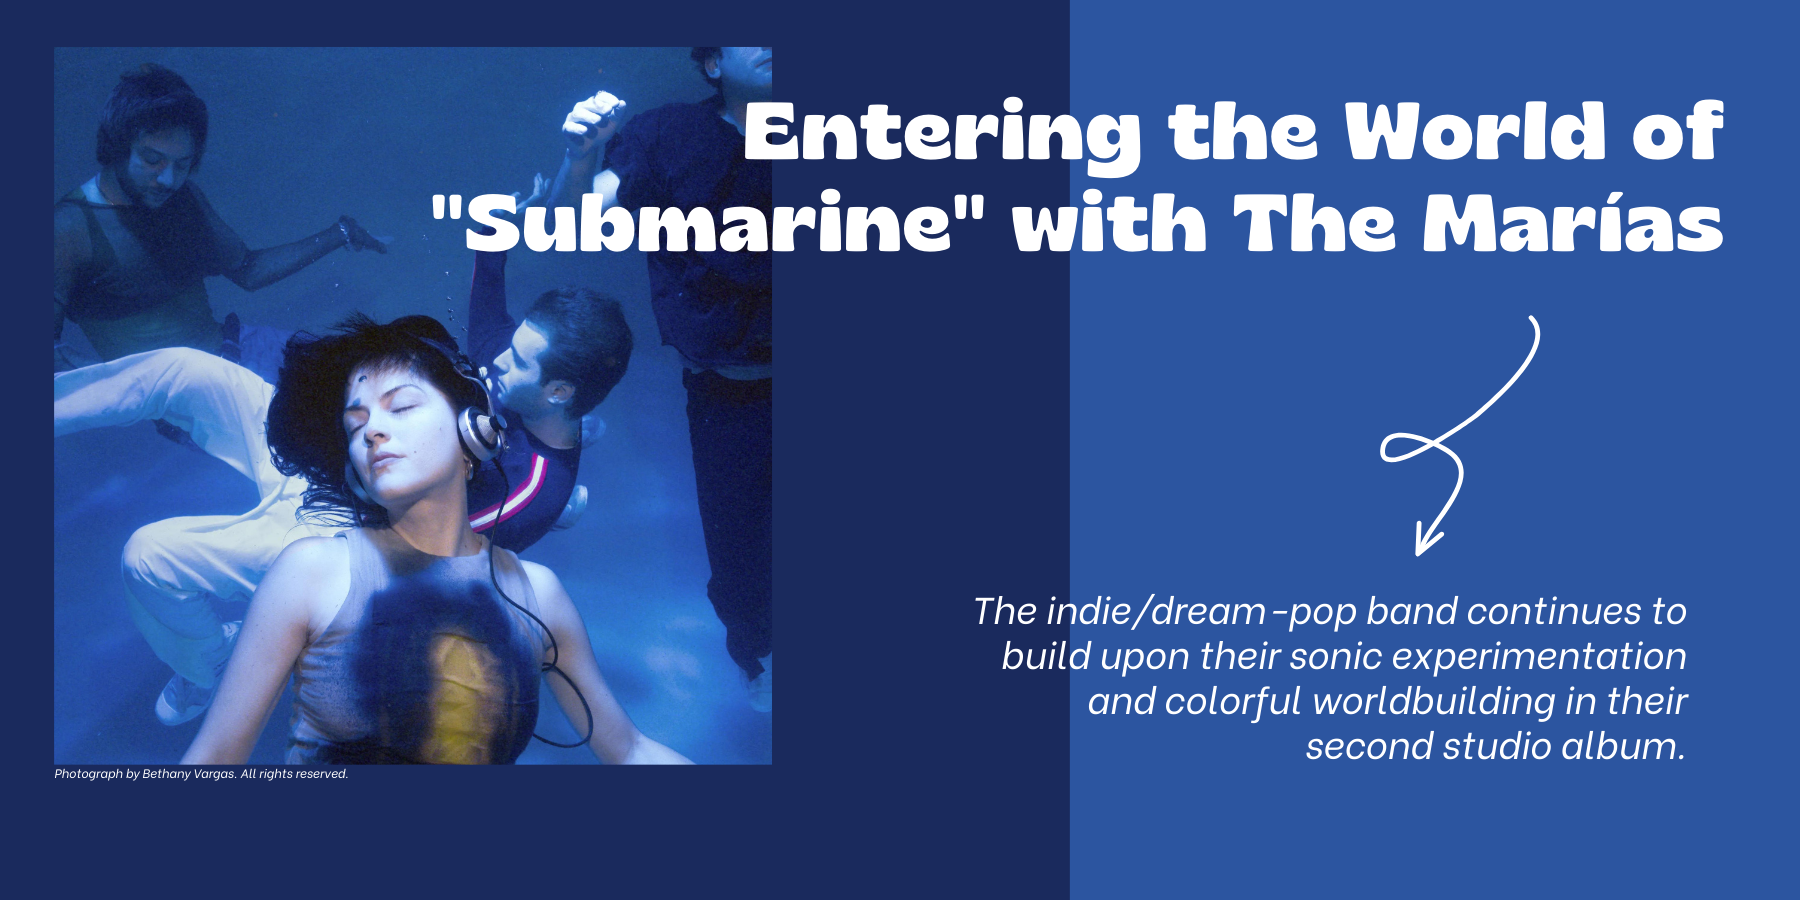 Entering the World of "Submarine" with The Marías